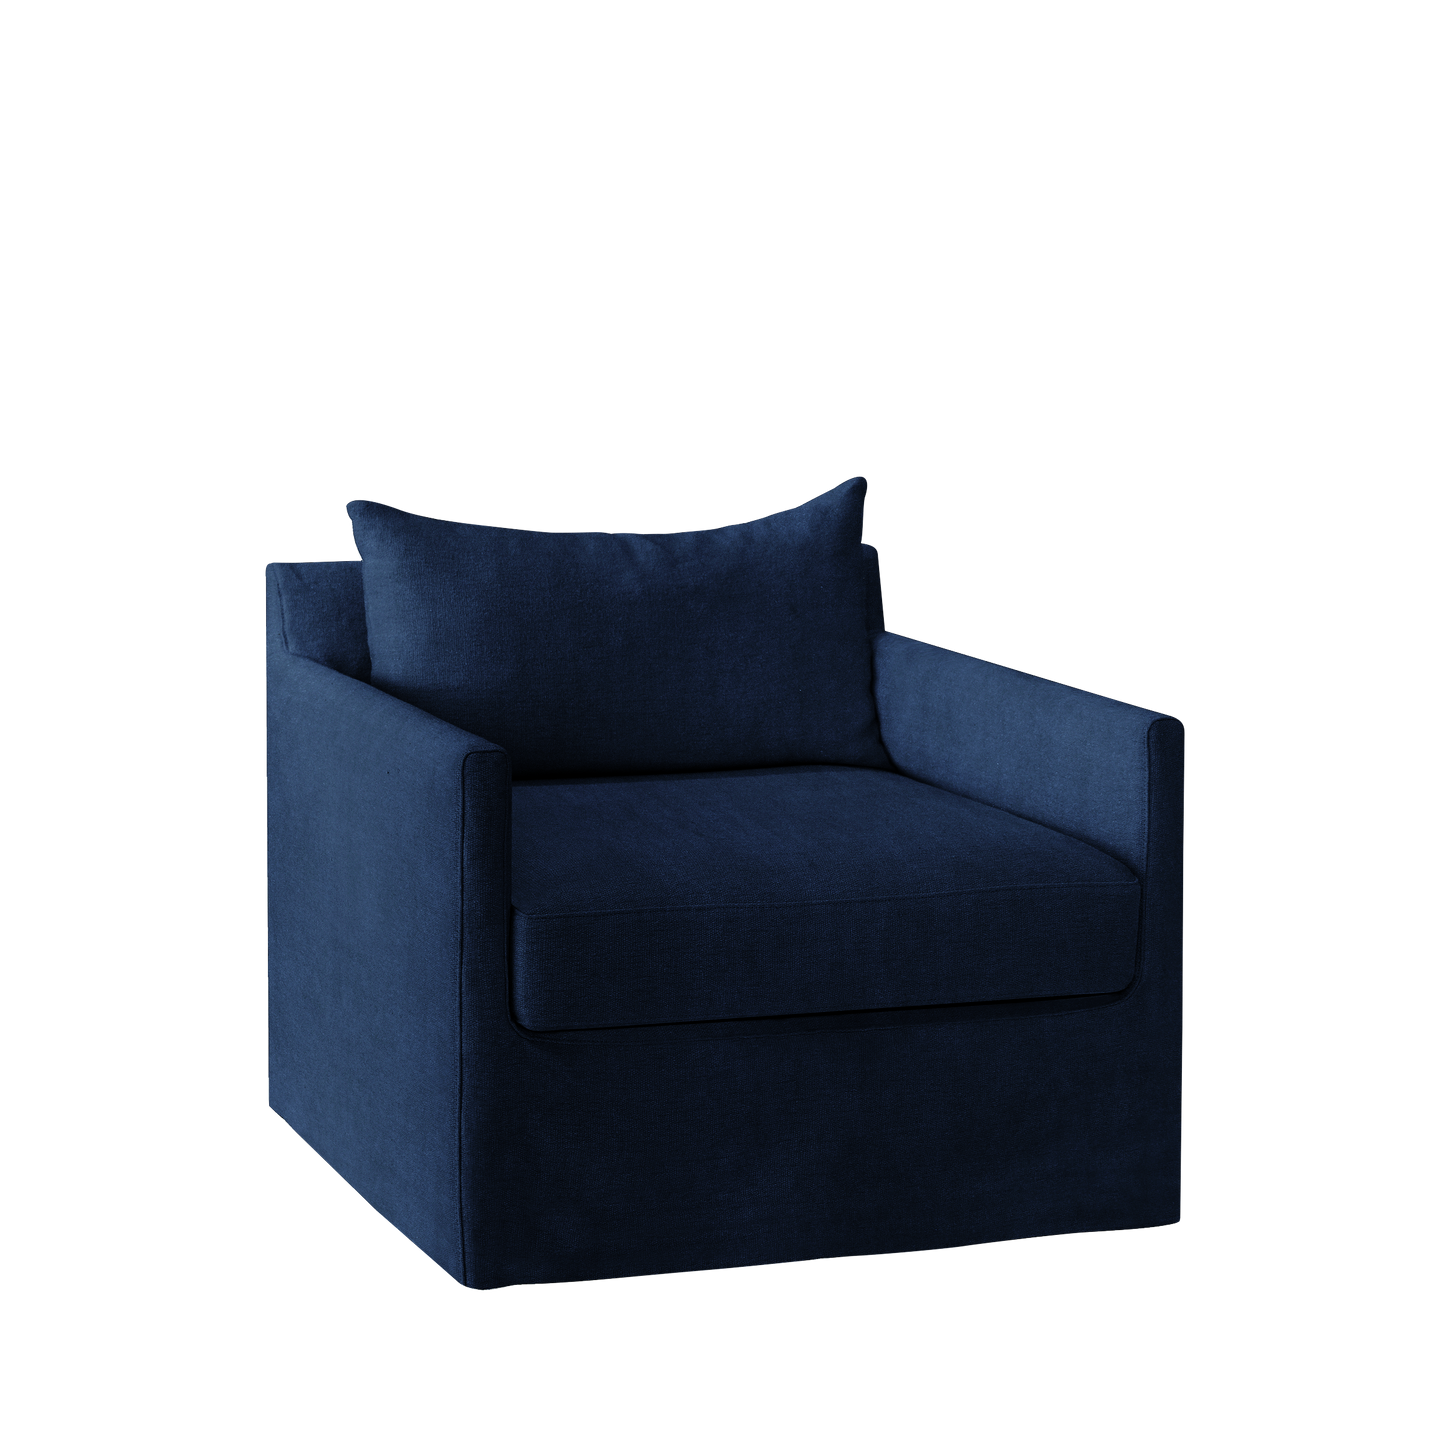 Extra wide Alba lounge chair with London dark blue textile